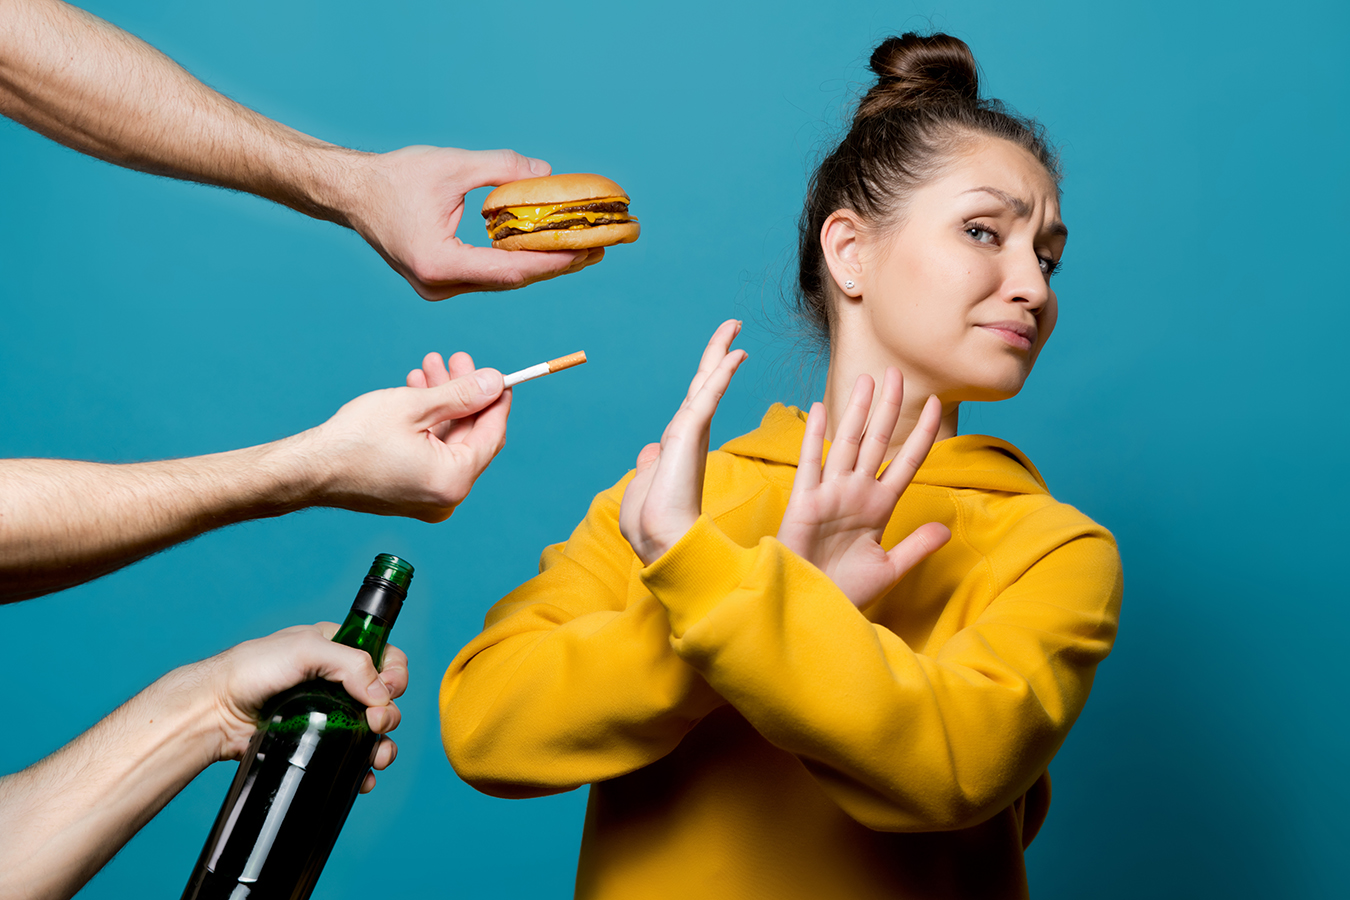 Girl crosses arms to reject "bad habit" items wine, cigarettes, burger